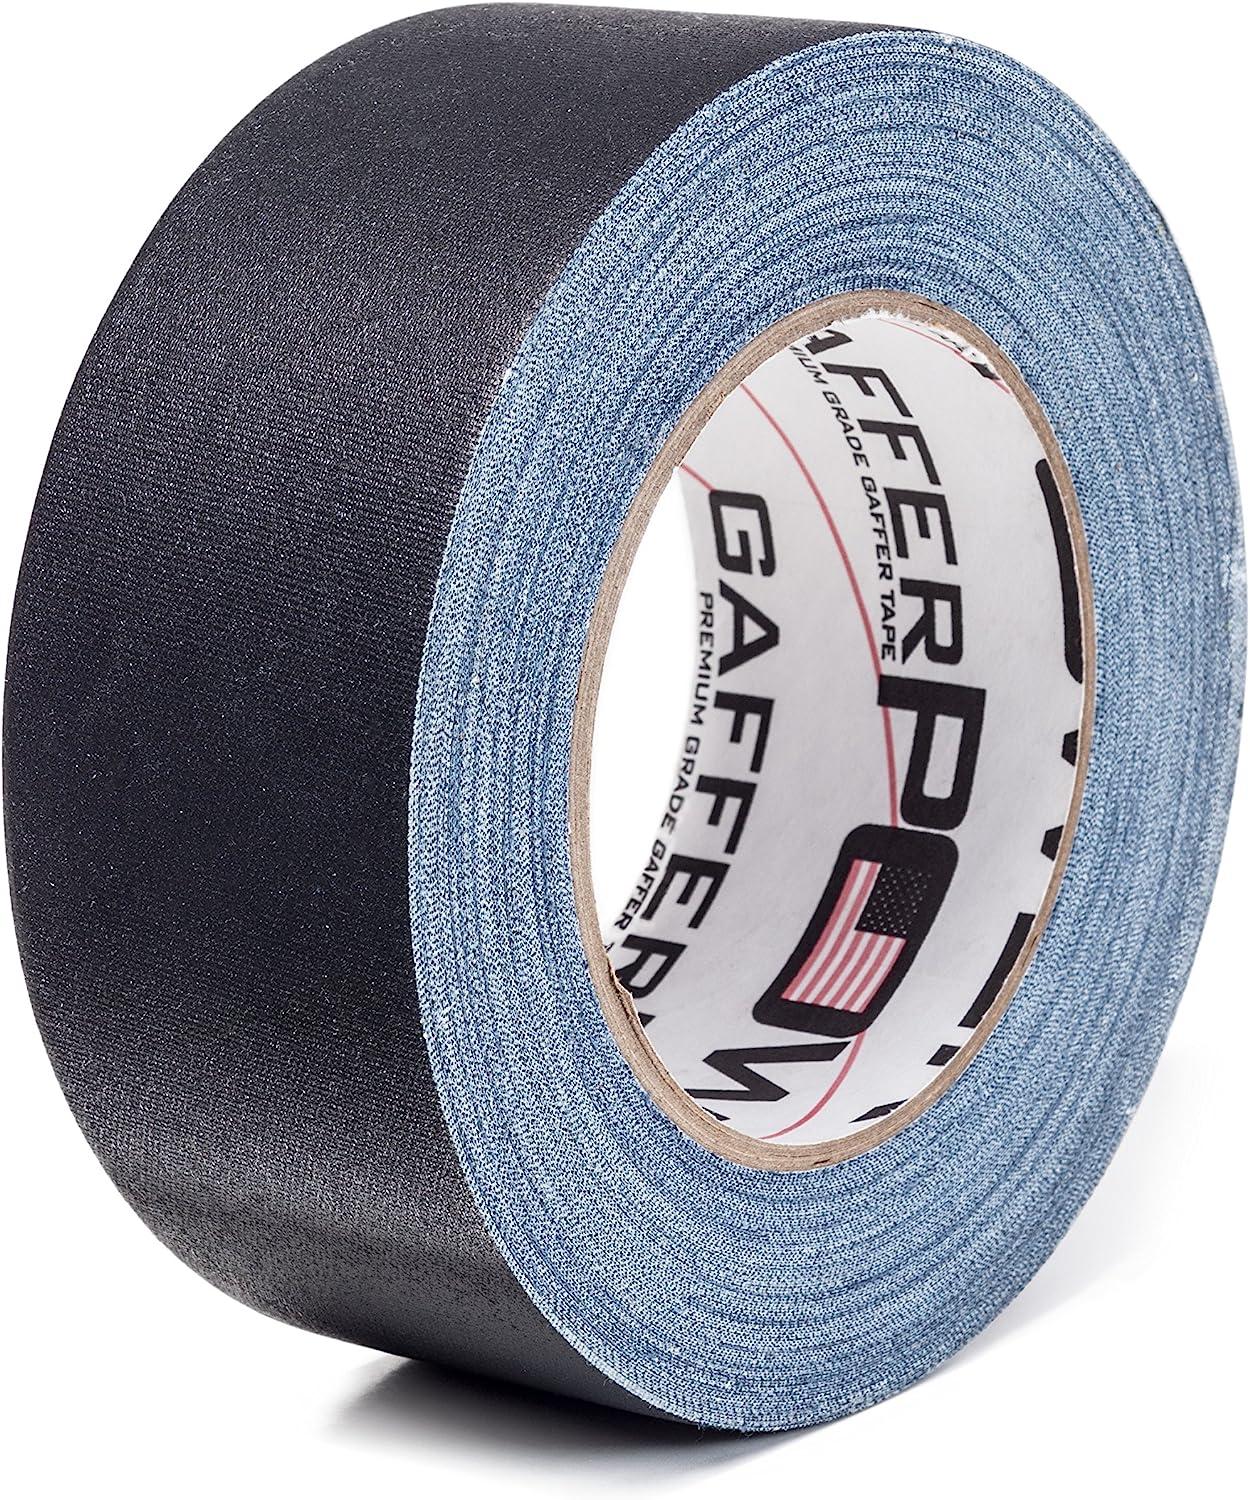 gaffer power real usa professional grade gaffer tape made in the usa heavy duty gaffers tape non-reflective